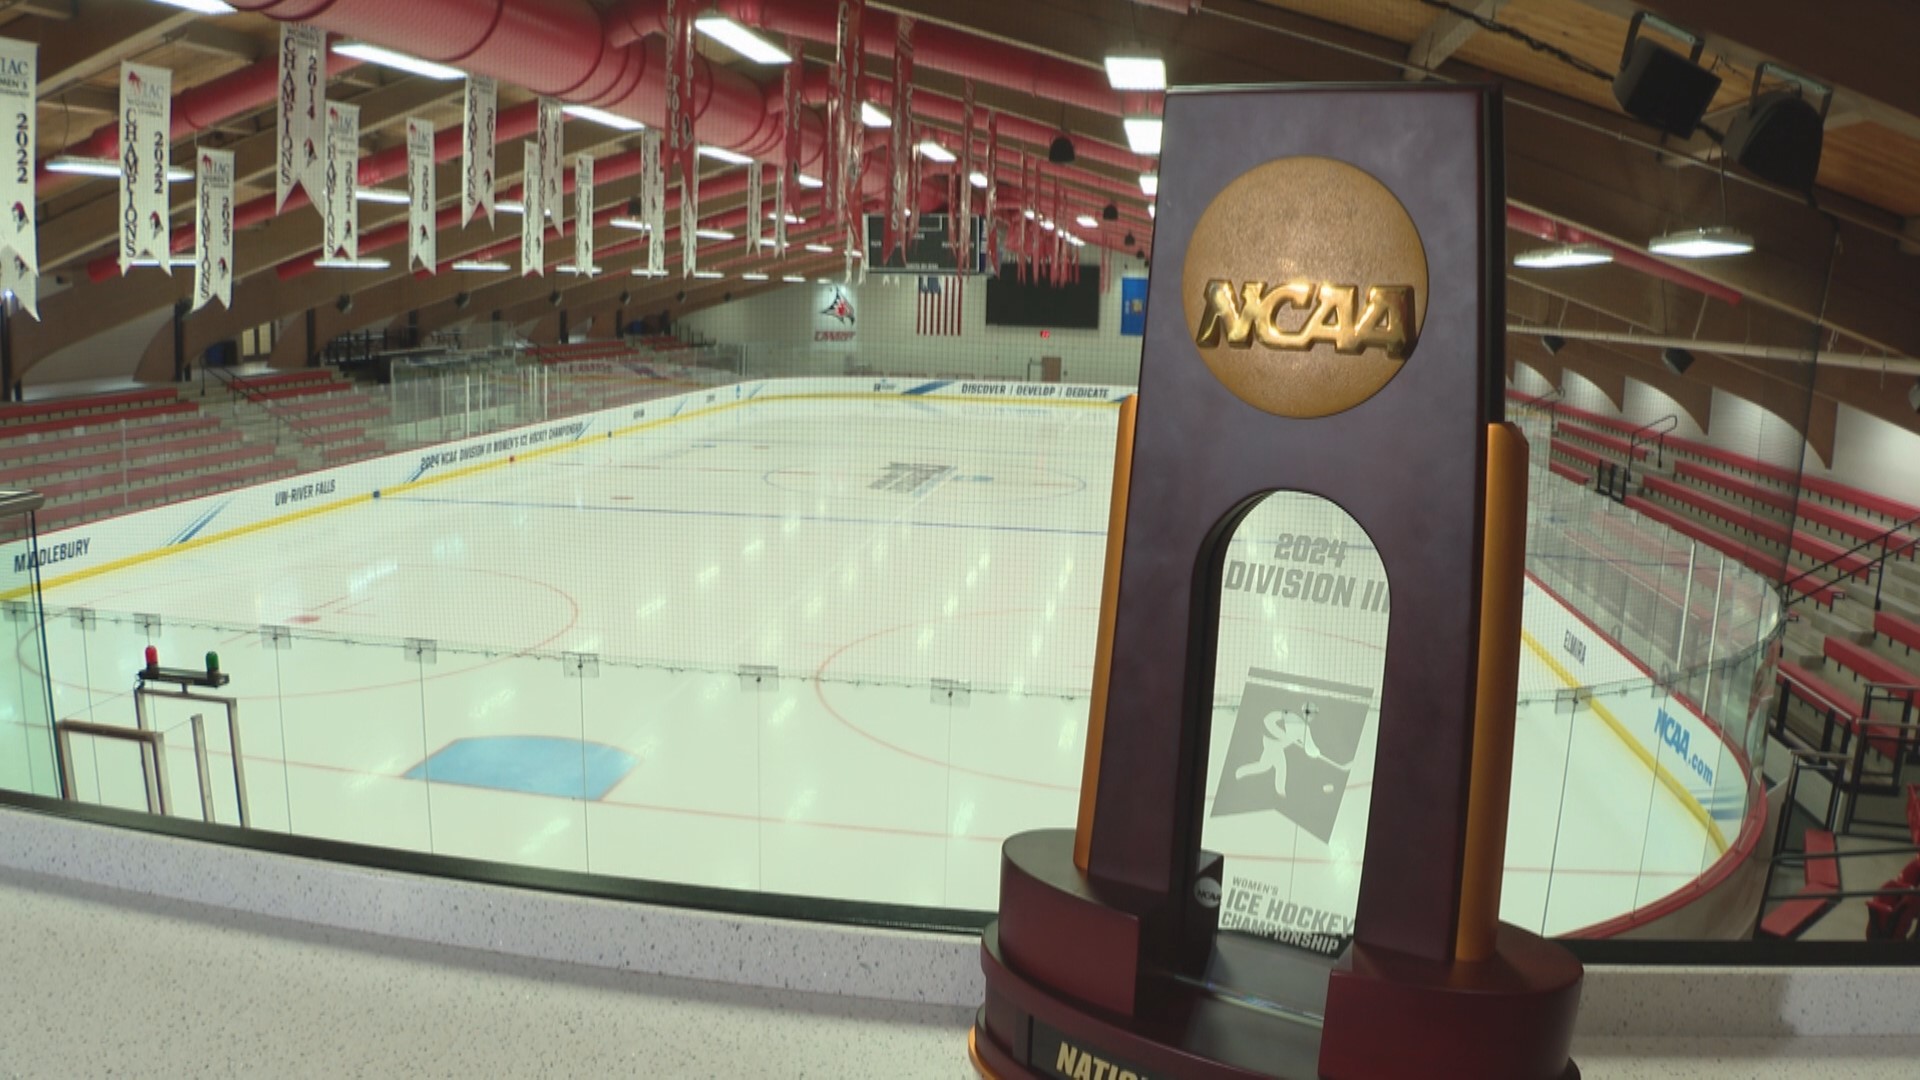 It's the Falcons' first NCAA Division III National Championship in the team's 25-year history.